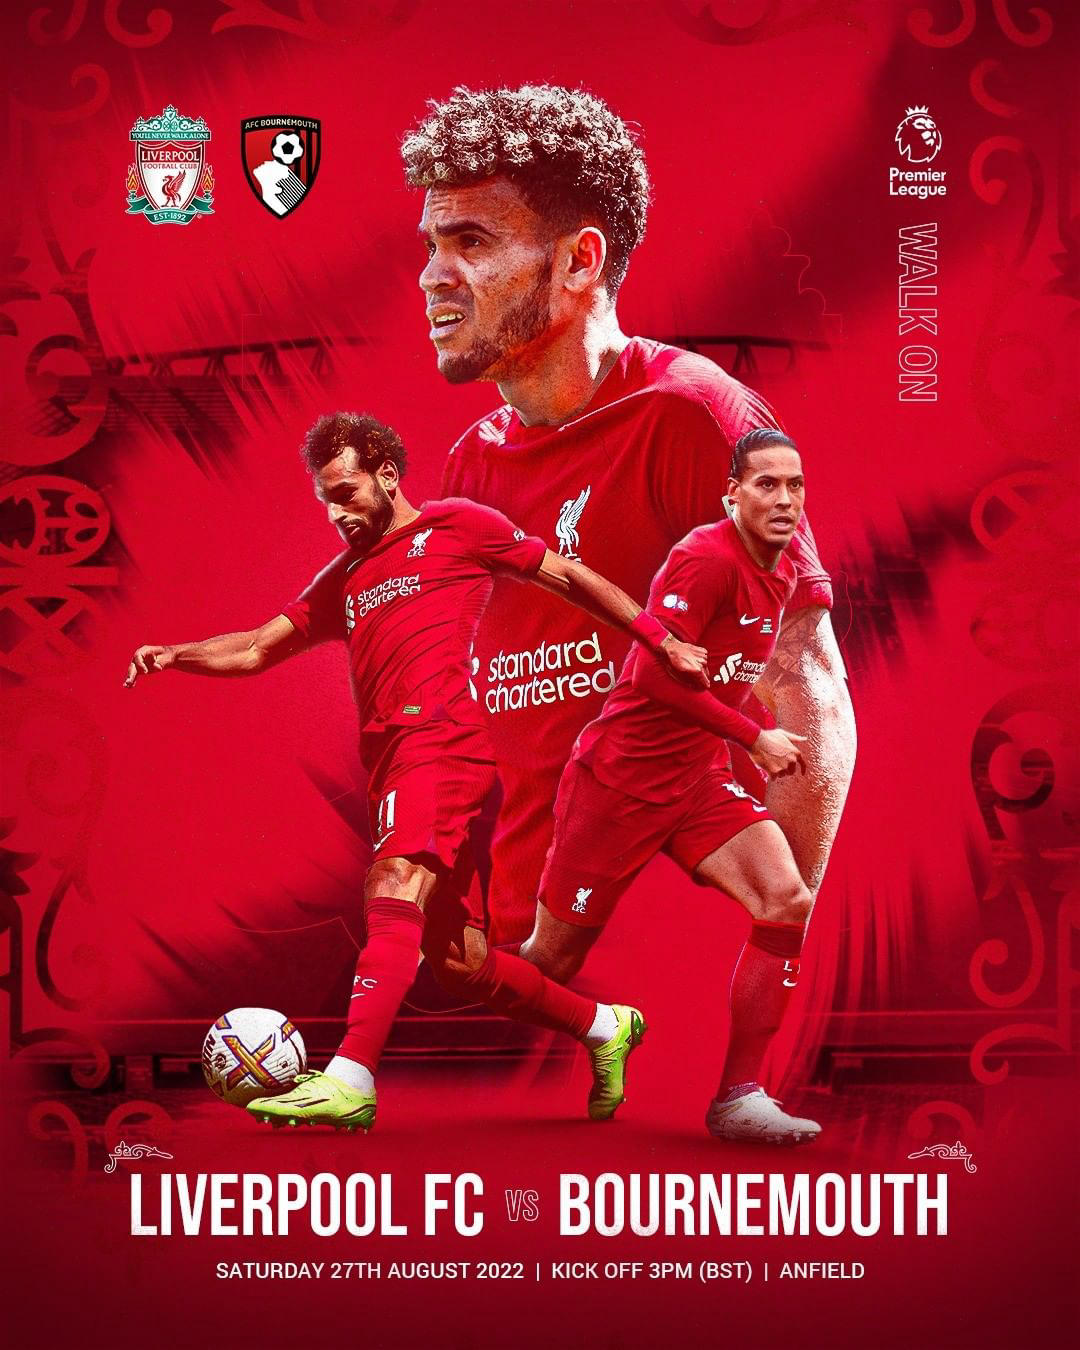 Liverpool Football Club - Back at Anfield as we take on #officialafcb in the #premierleague